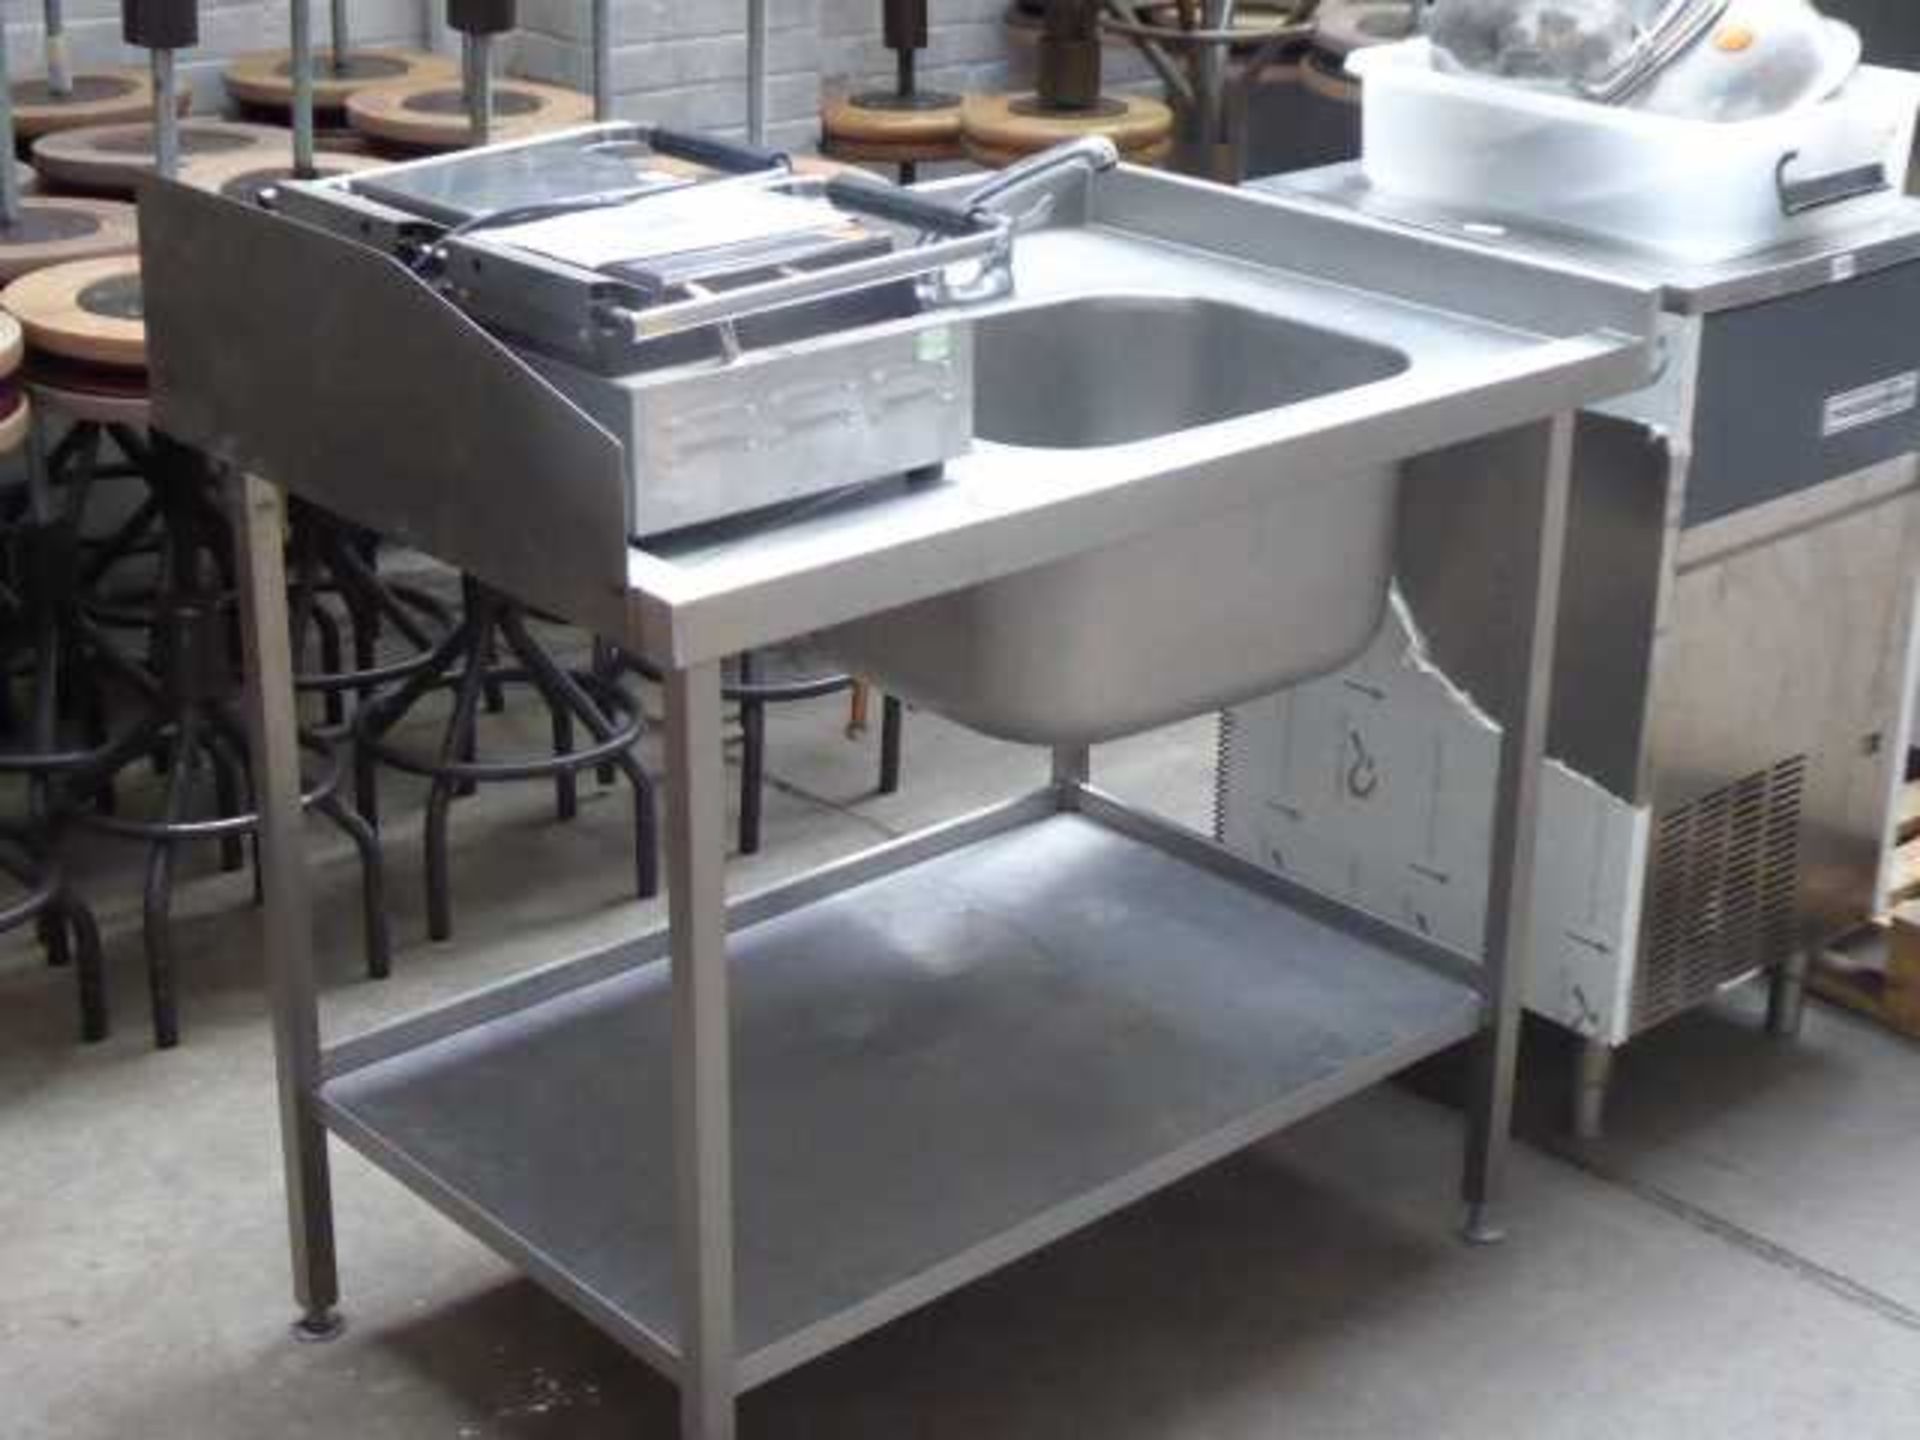 112cm stainless steel sink with draining board, tap set and shelf under